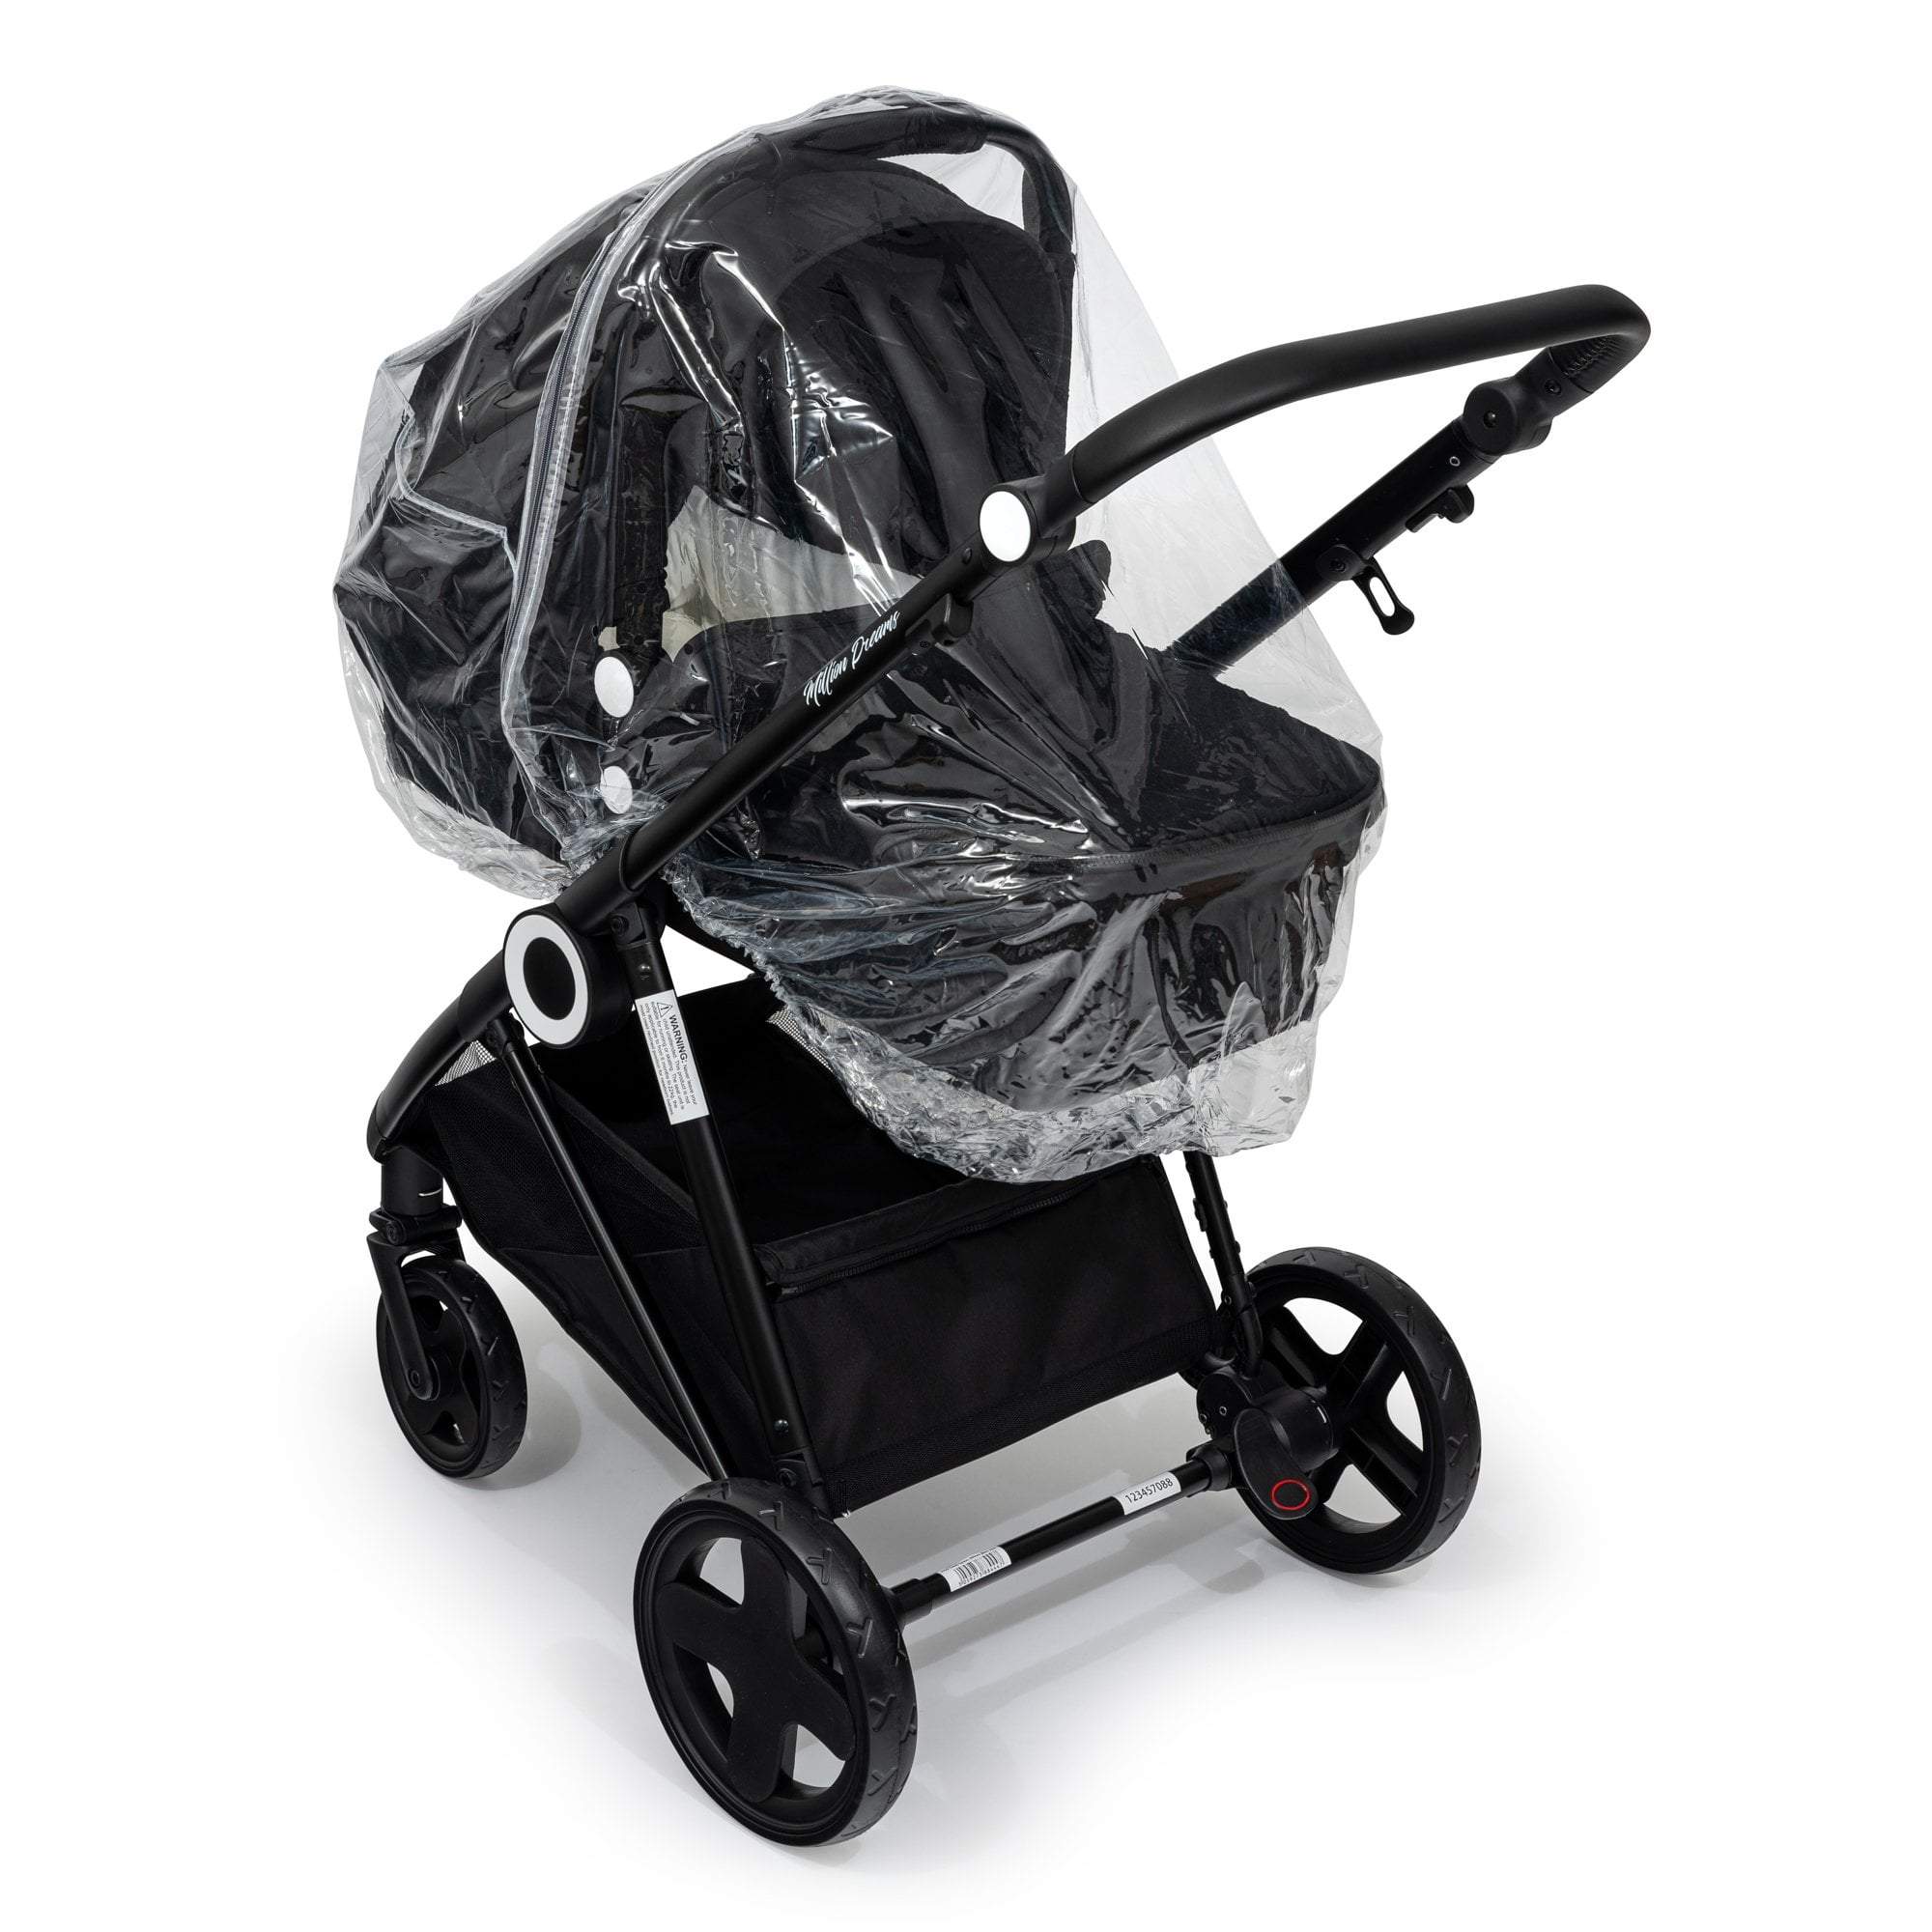 Carrycot Raincover Compatible With Venicci - Fits All Models - For Your Little One